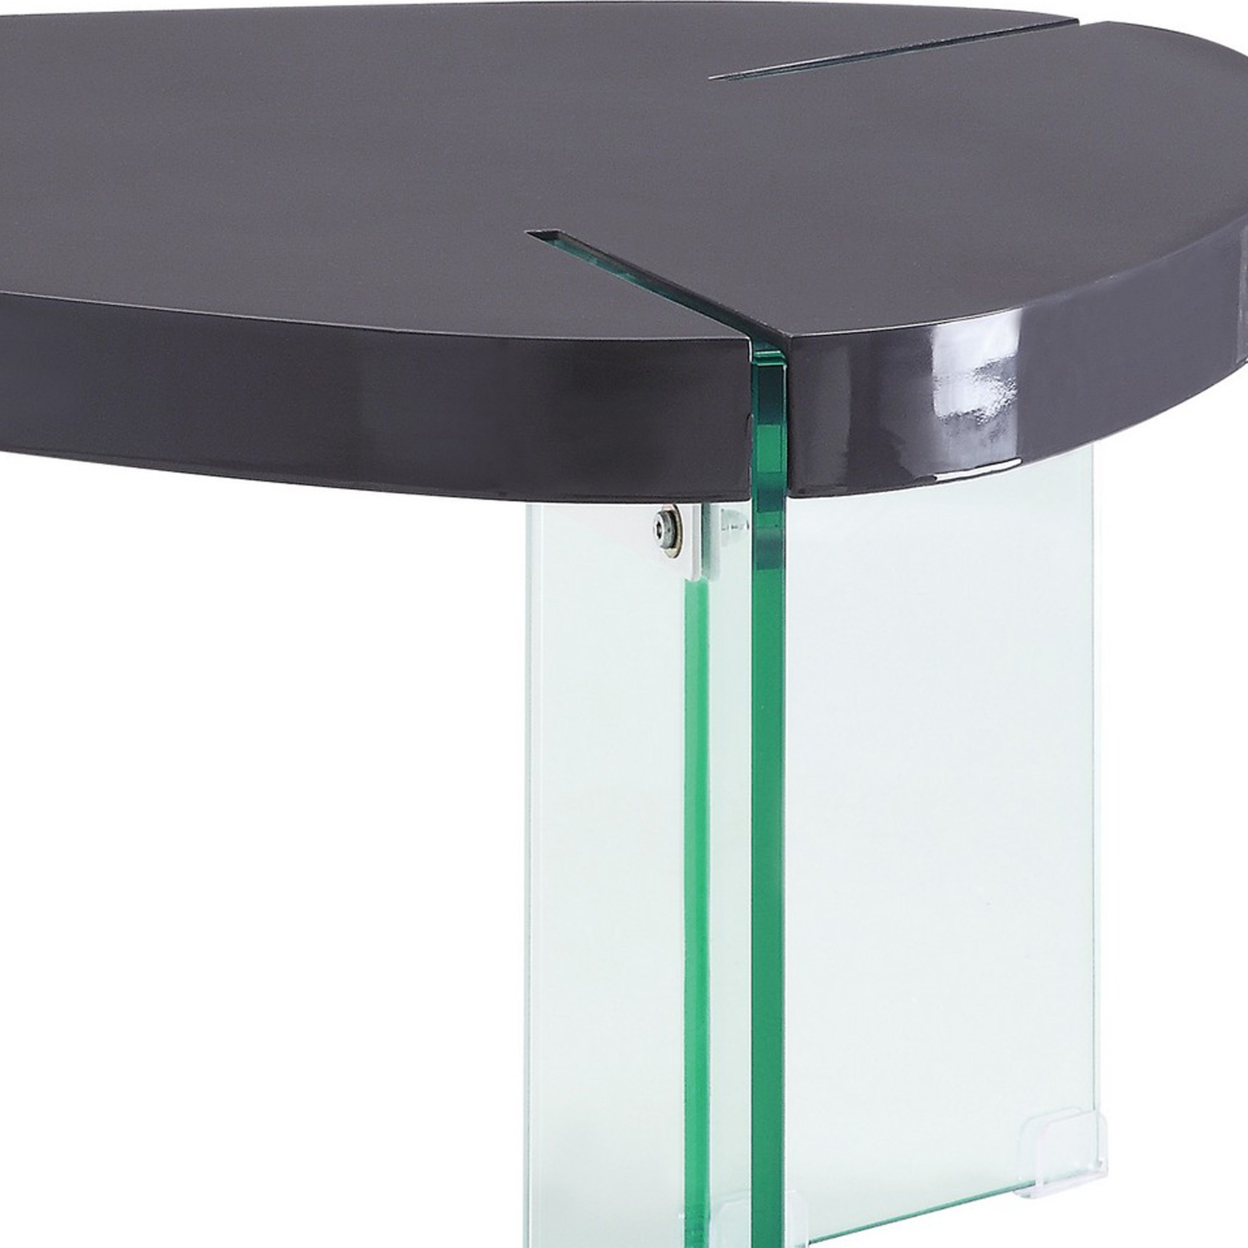 30 Inches Plectrum Top Coffee Table With Glass Legs, Gray- Saltoro Sherpi